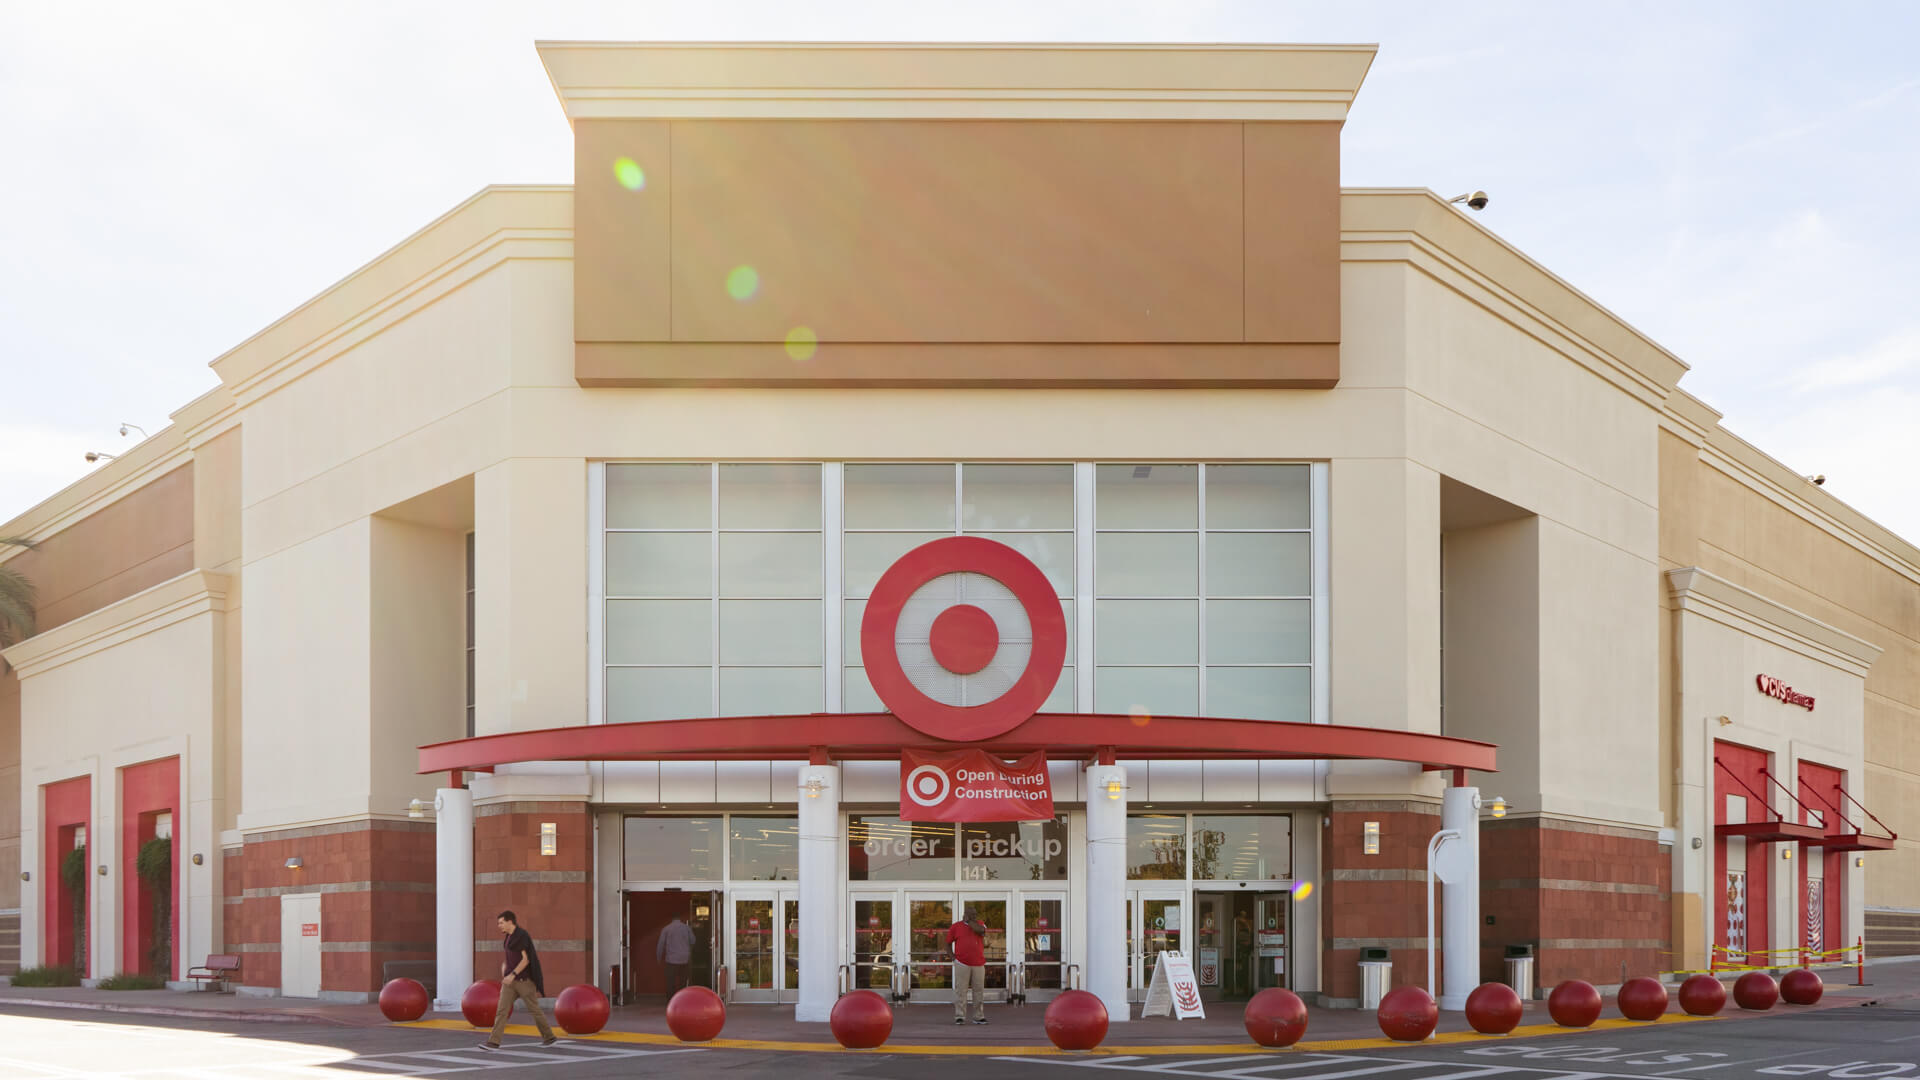 Does Target Take EBT In 2022? (All You Need To Know)